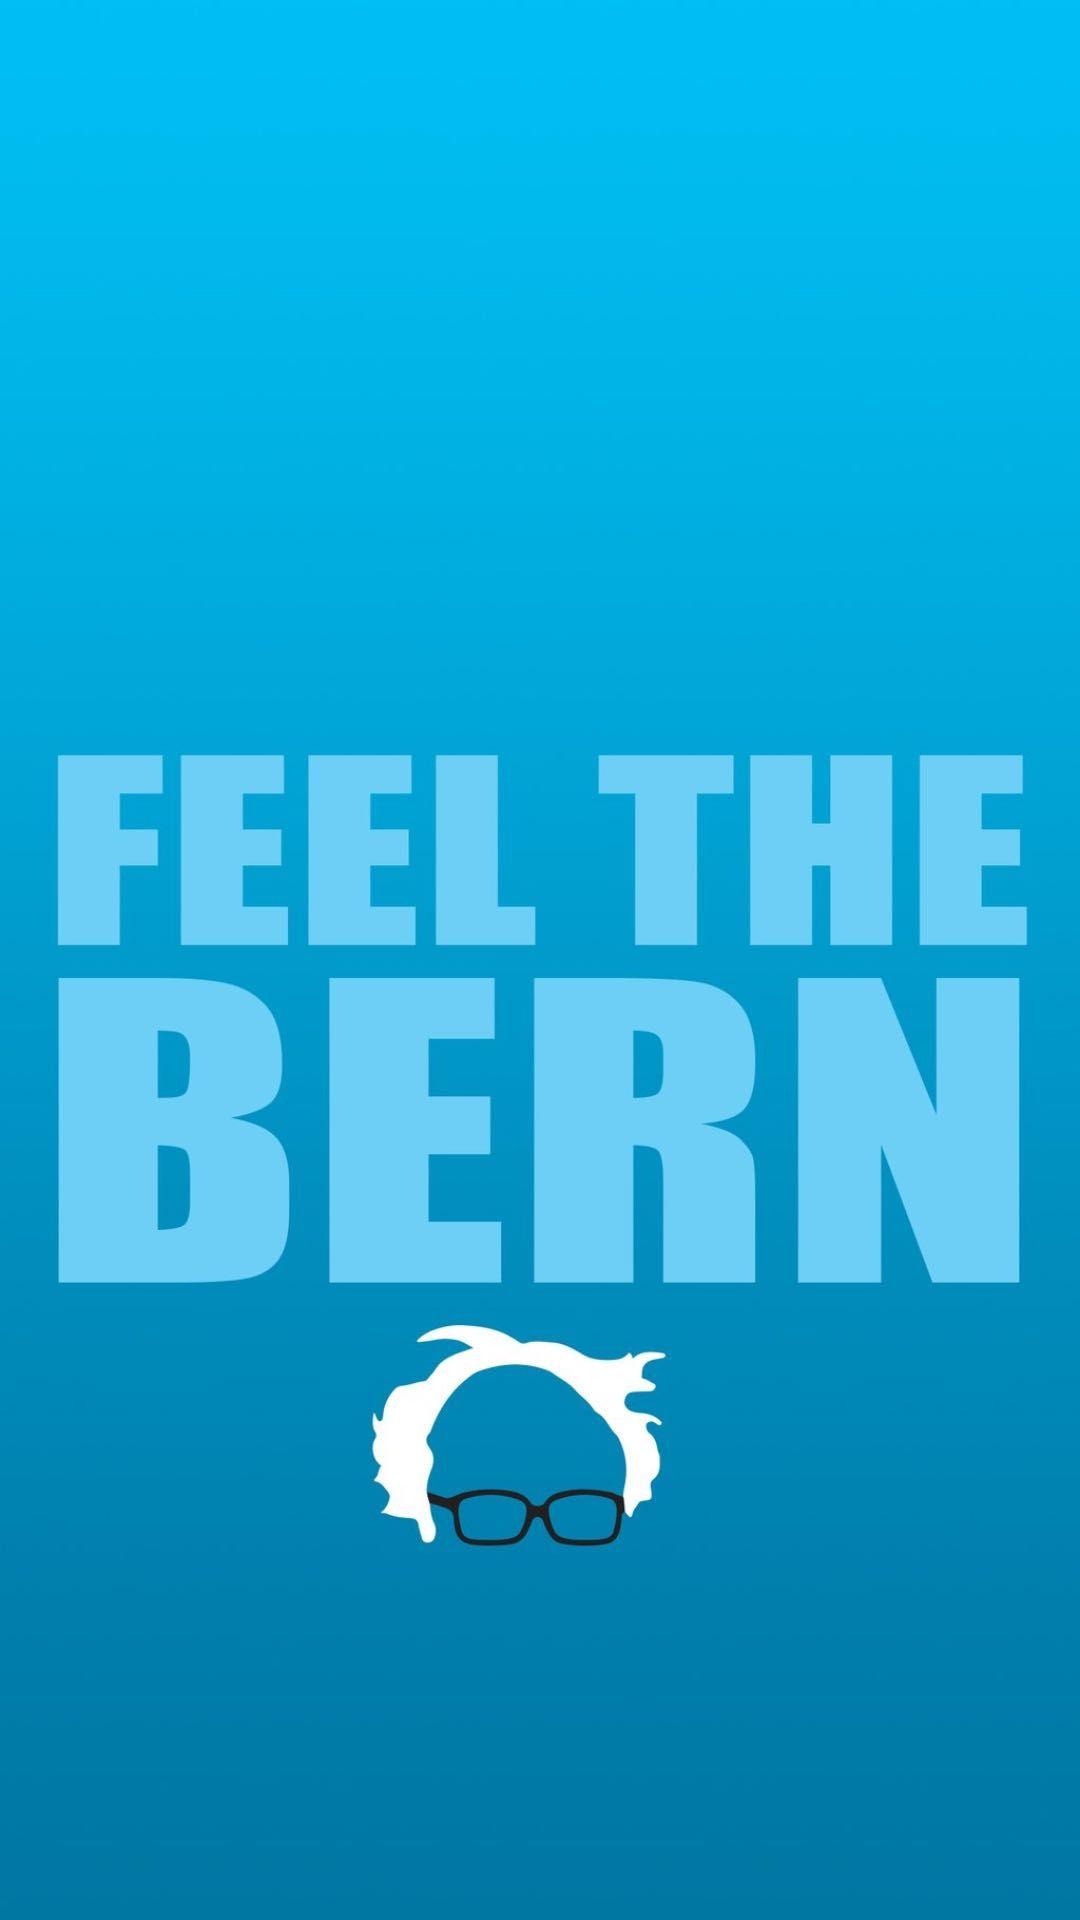 If you support Bernie Sanders this will do nicely!. Wallpaper